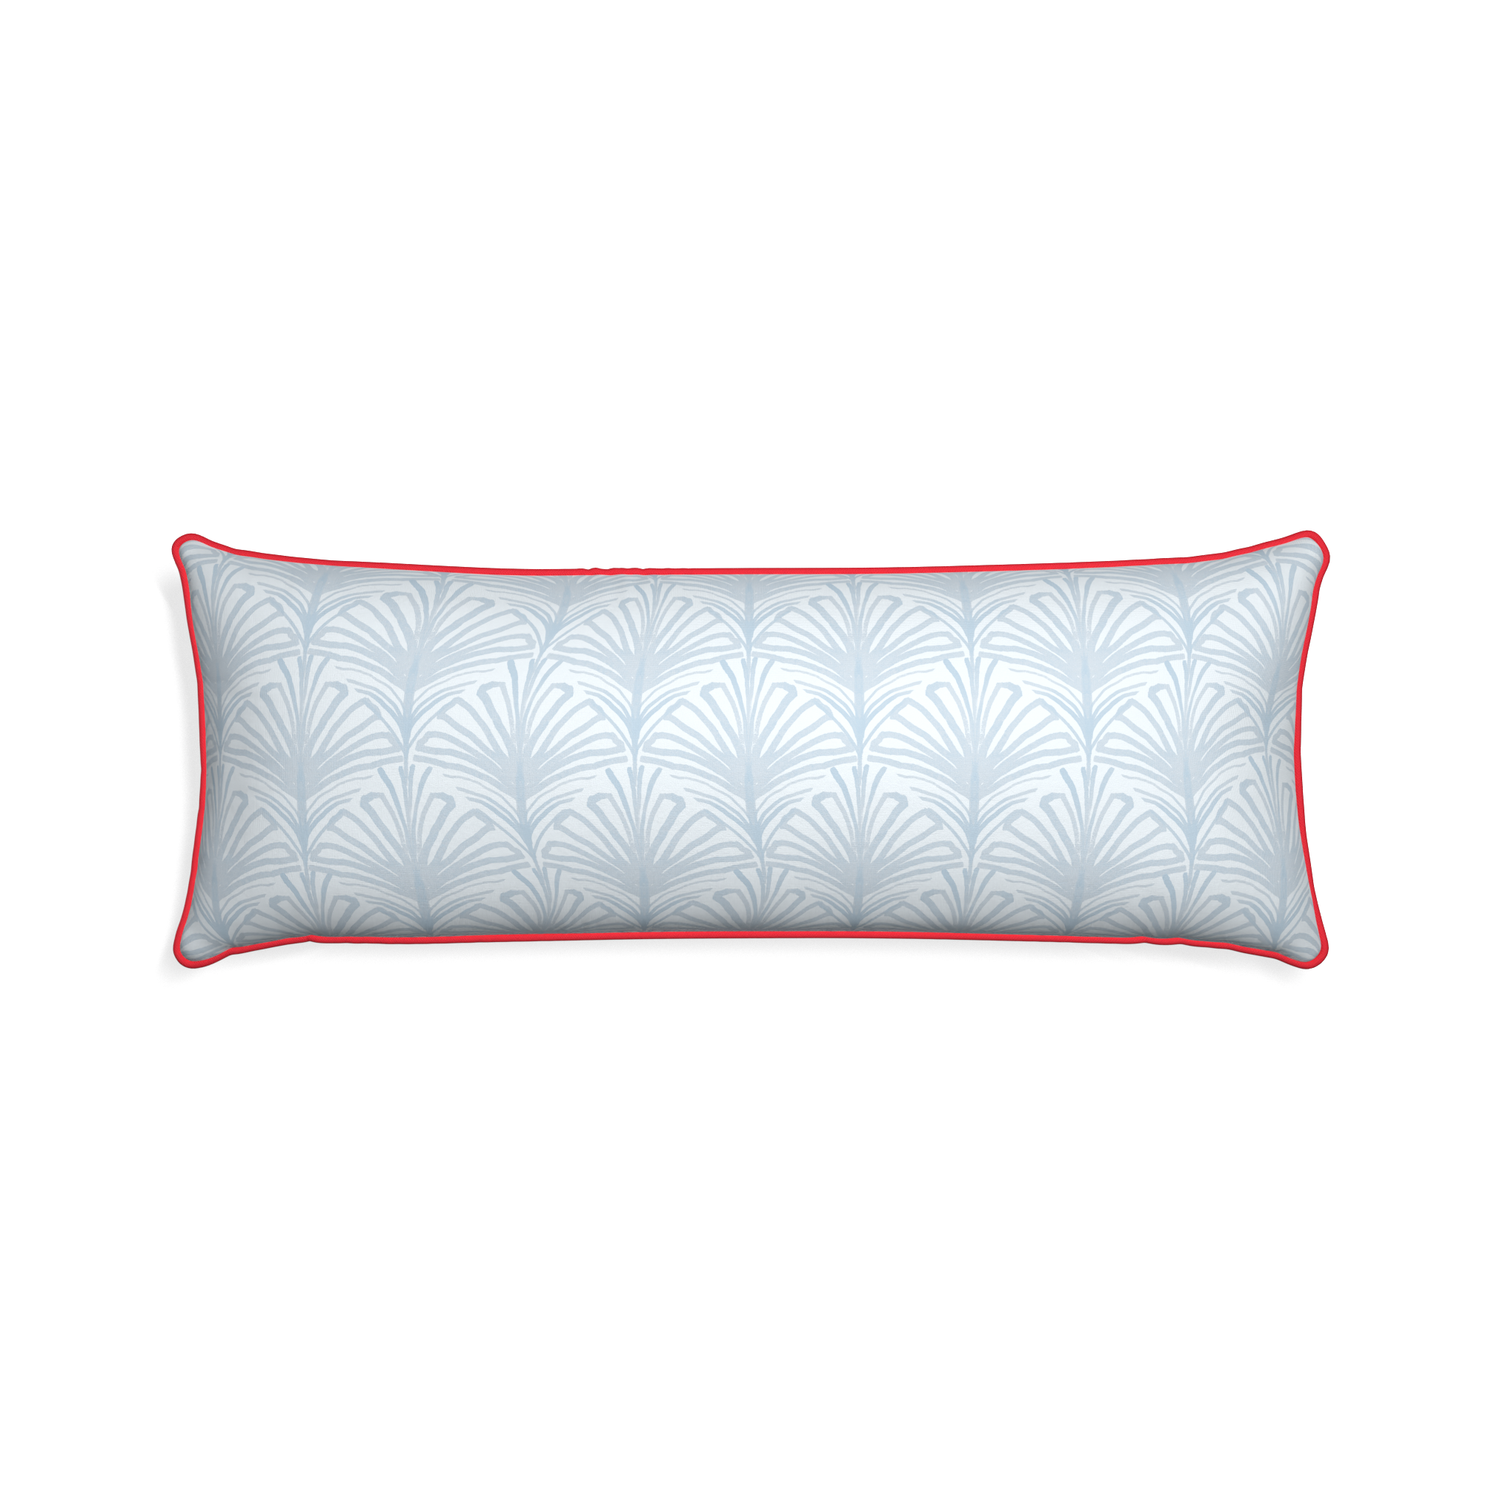 Xl-lumbar suzy sky custom pillow with cherry piping on white background